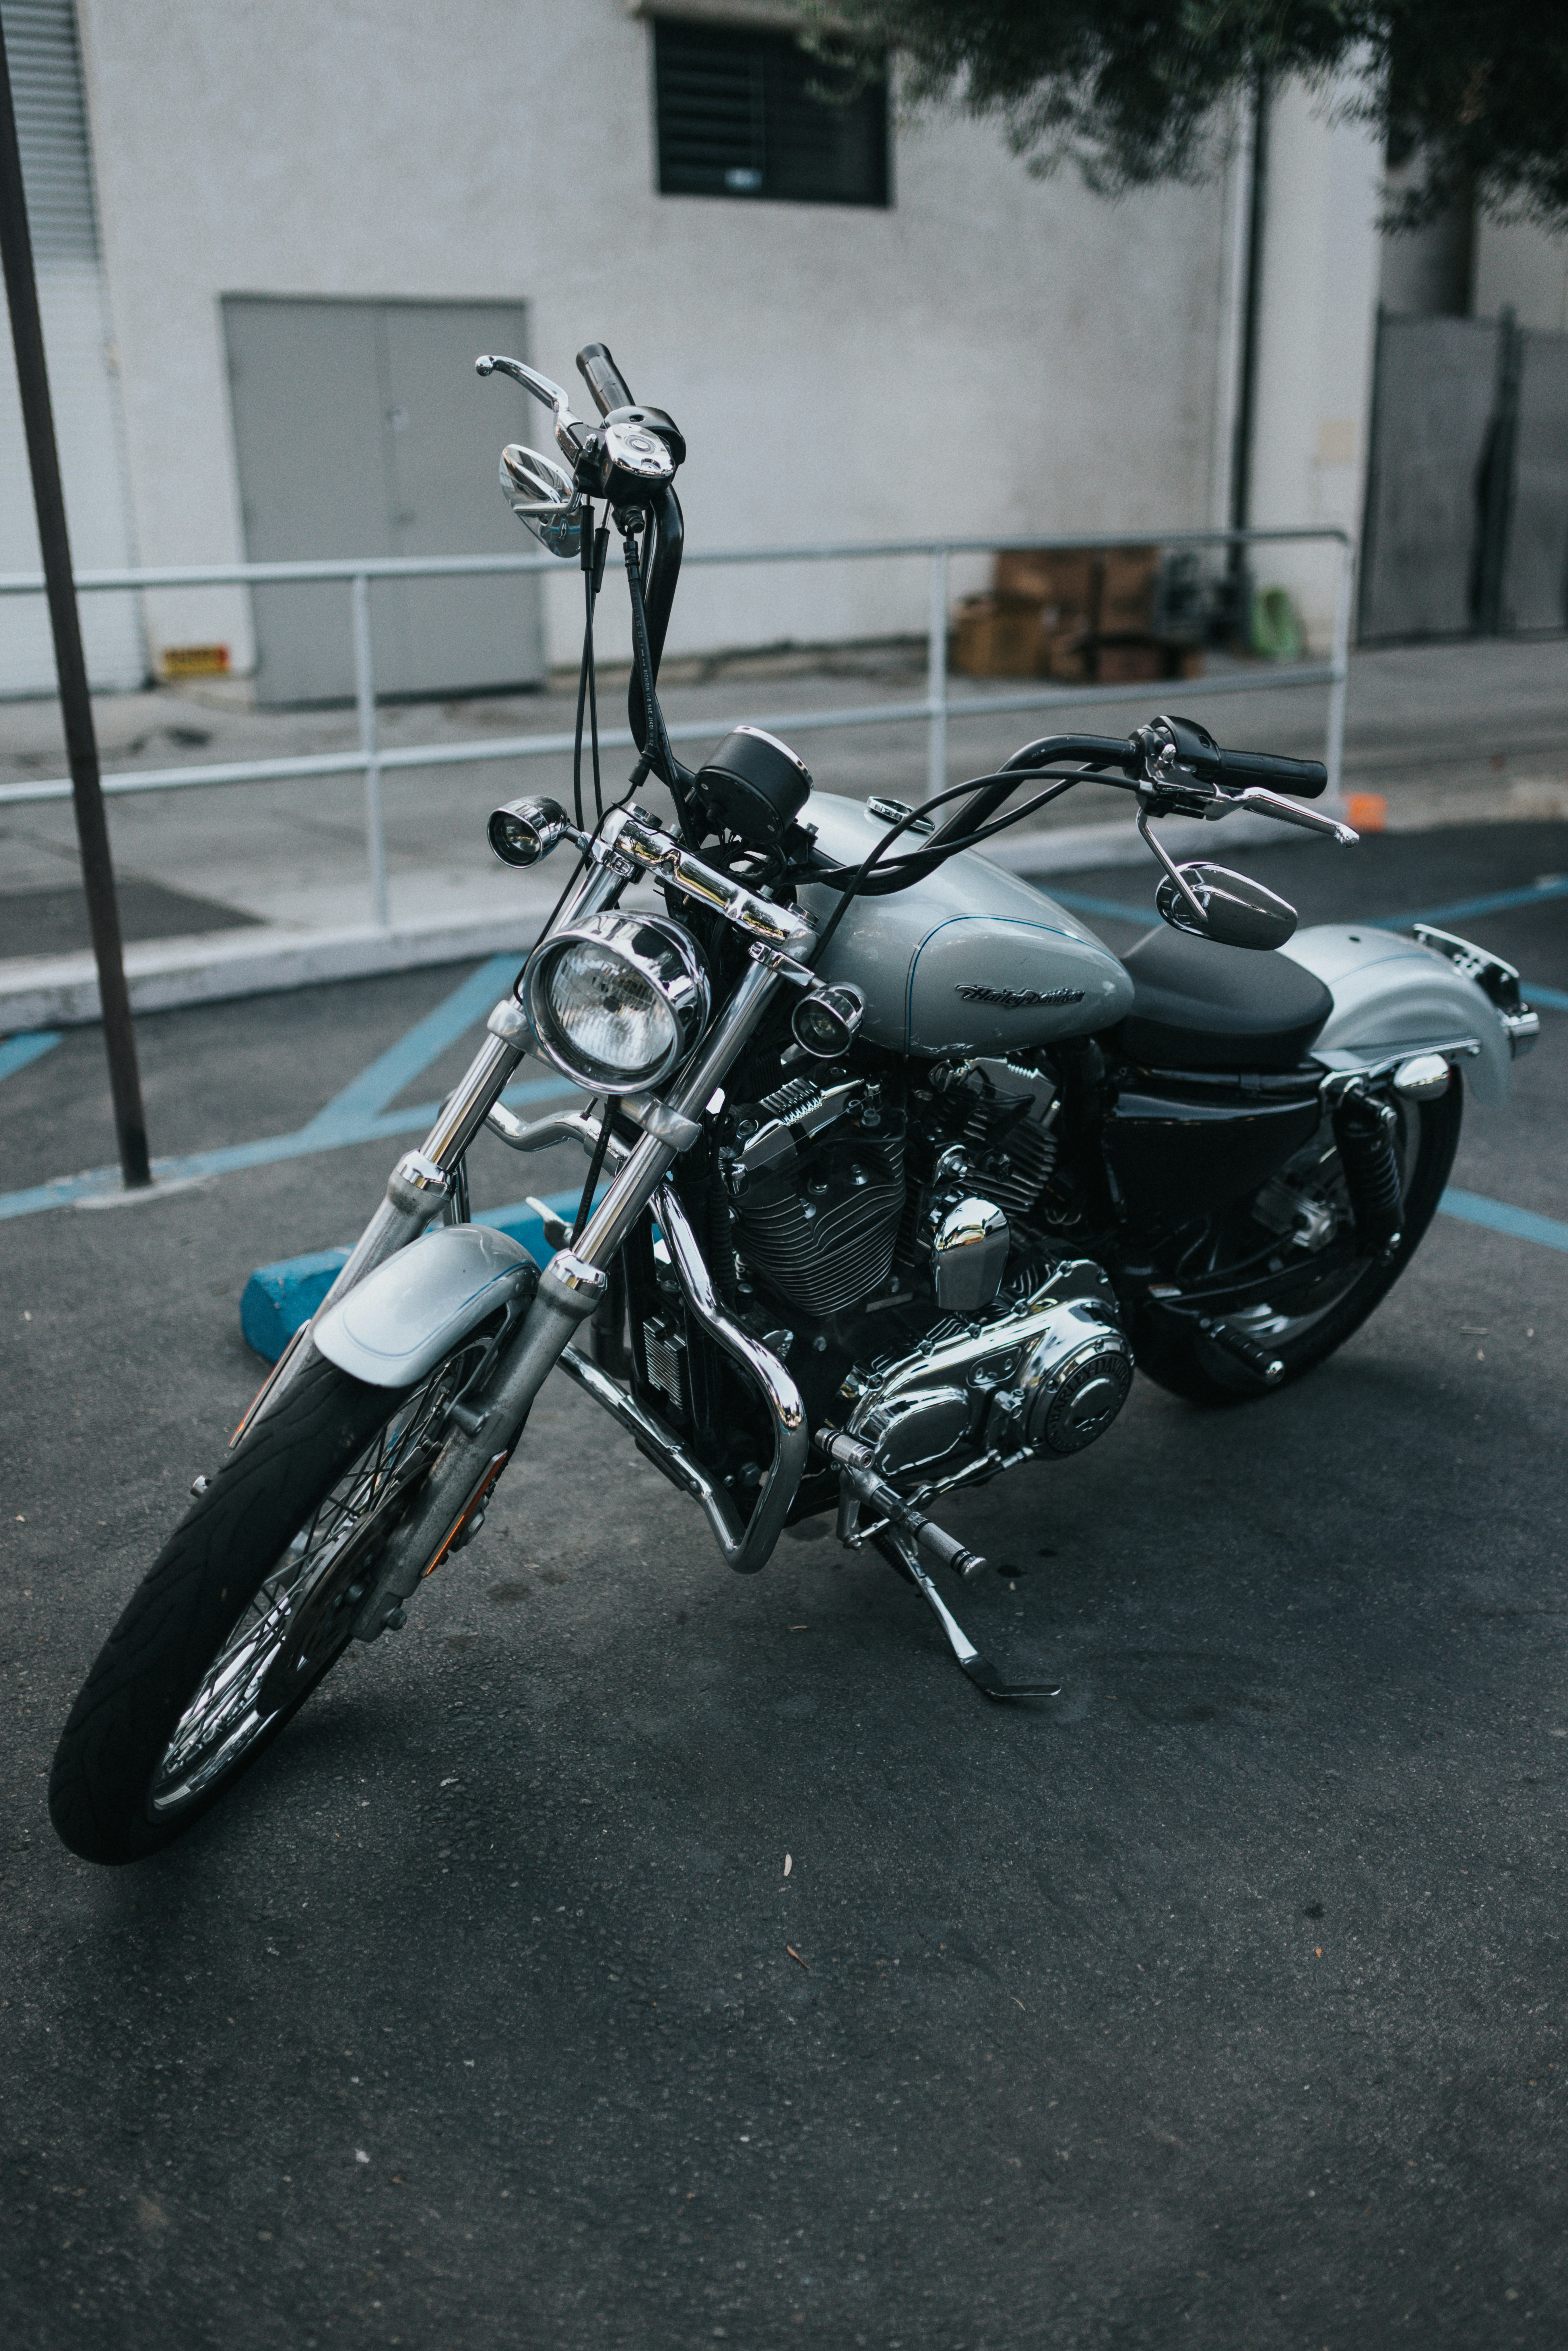 black and blue motorcycle parked on gray concrete floor during daytime